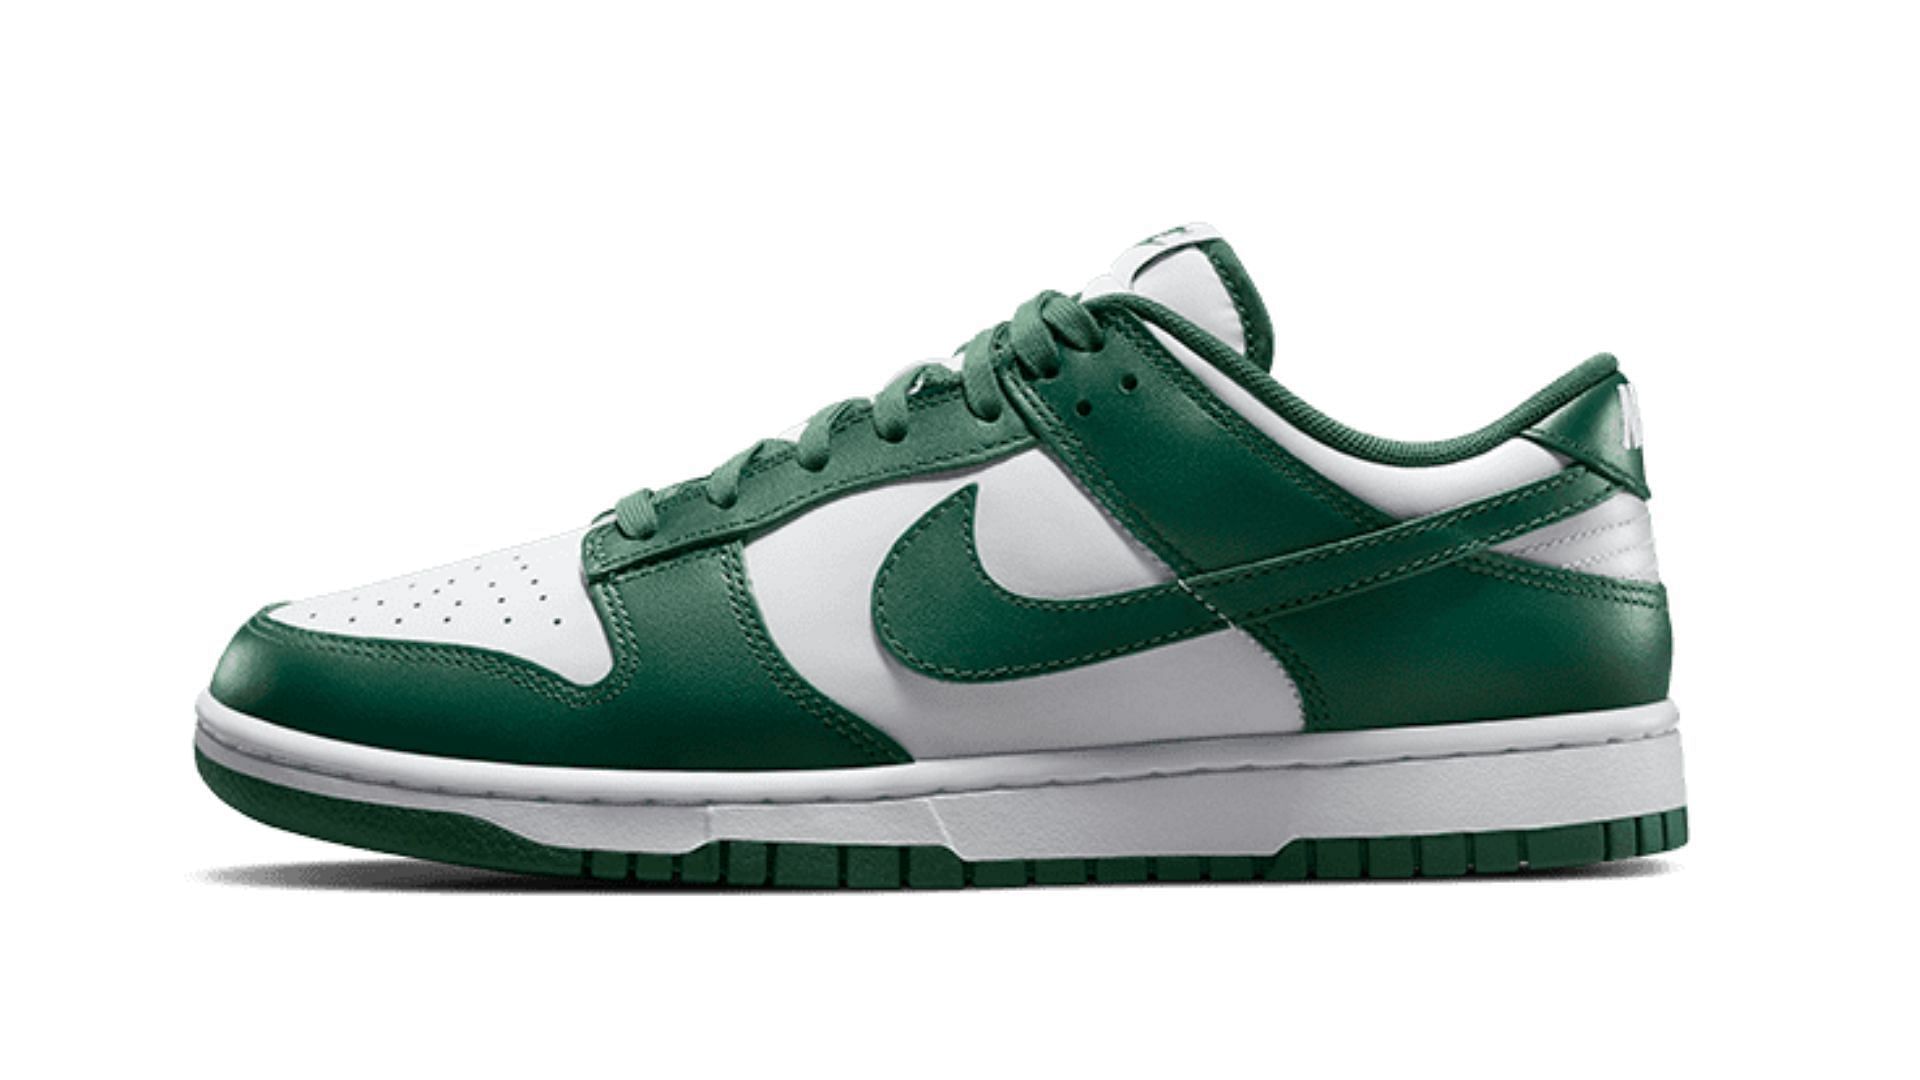 Nike Dunk Low “Team Green” restock: Features explored